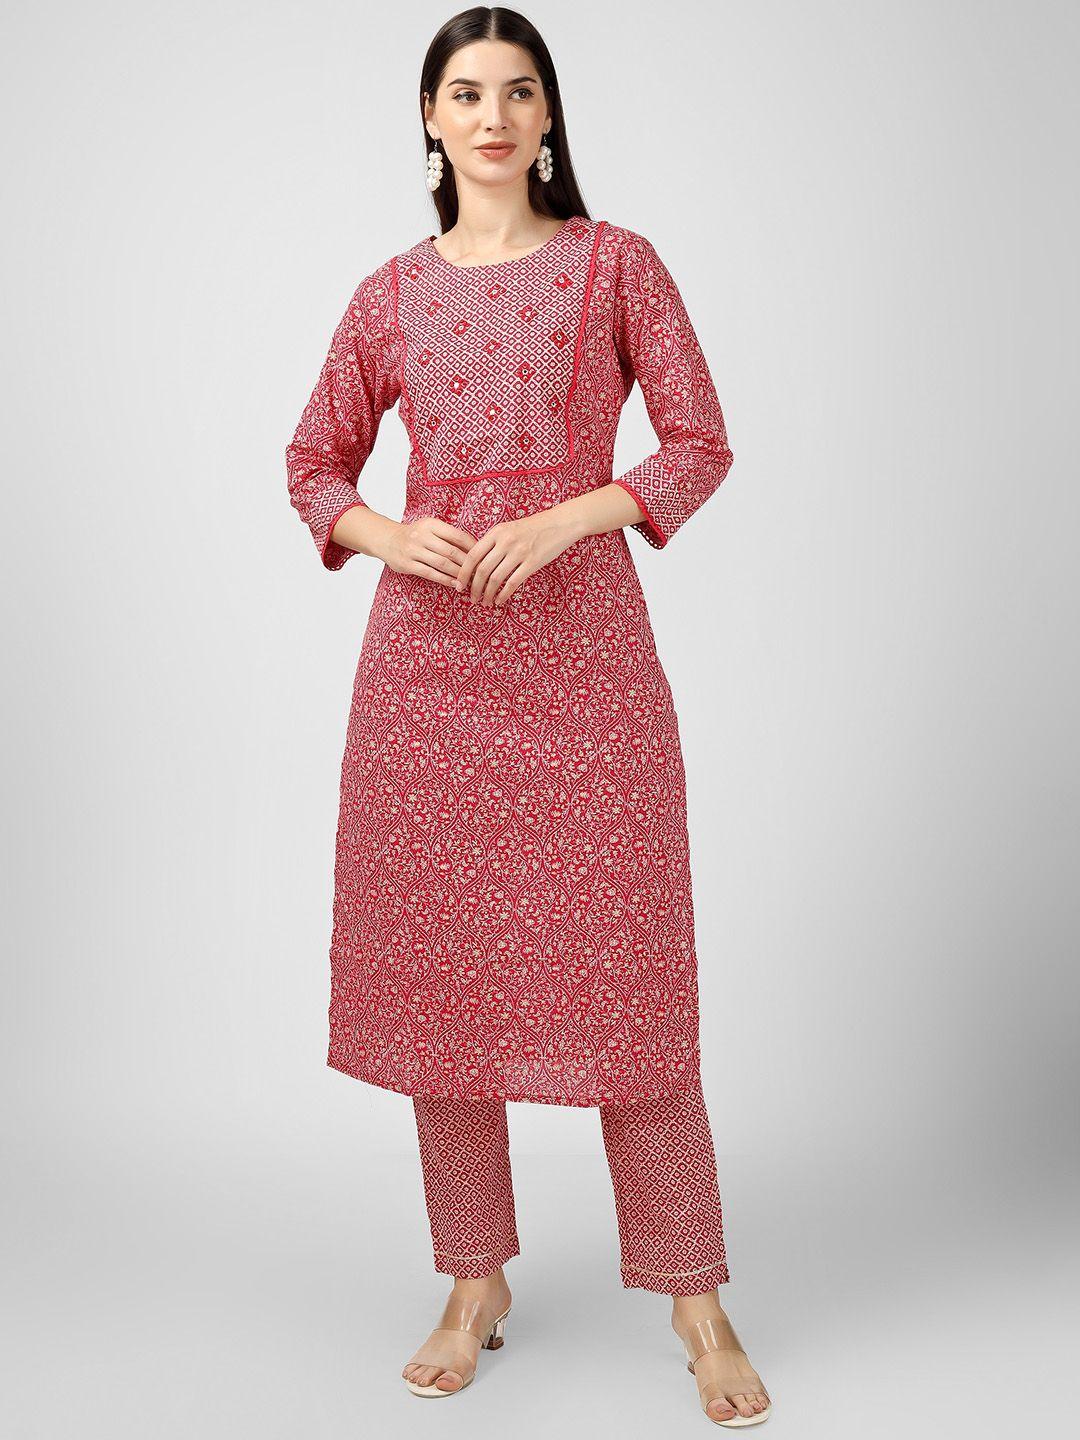 misbis floral printed mirror work pure cotton straight kurta with trouser